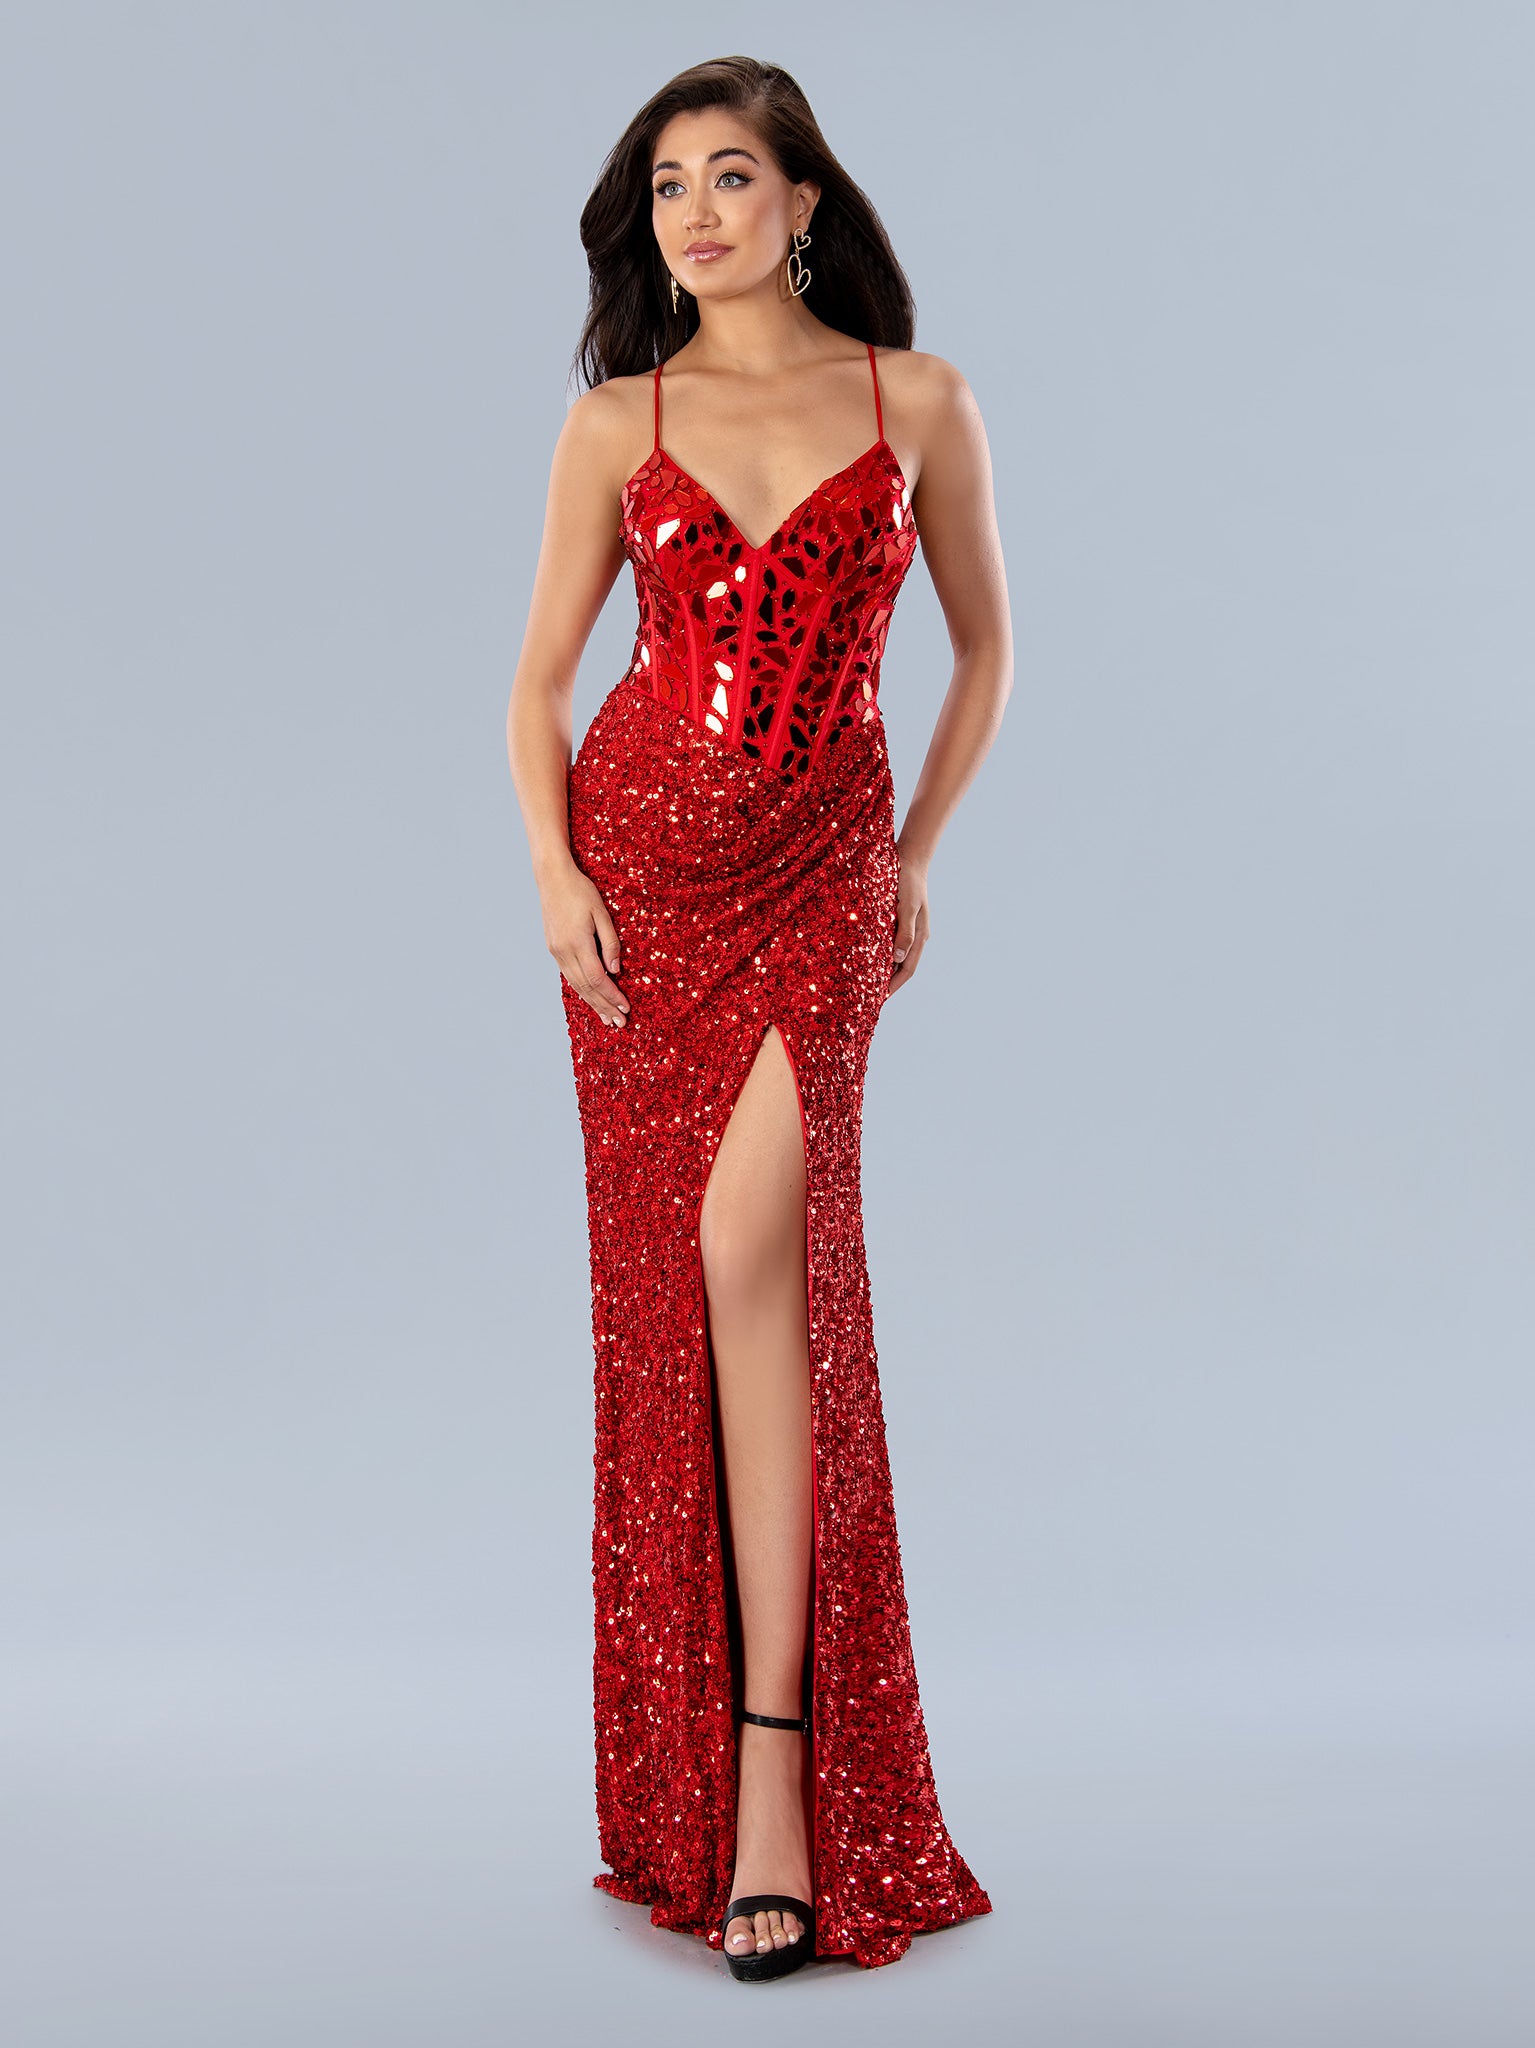 Look breathtaking in Stella Couture 24161. This floor-length dress features a V-neckline and a sparkling sequin-cut corset bodice. The long, A-line skirt features a high slit for a touch of allure. Perfect for formal prom events or special occasions.  Sizes: 0-24  Colors: BLACK, RED, SILVER